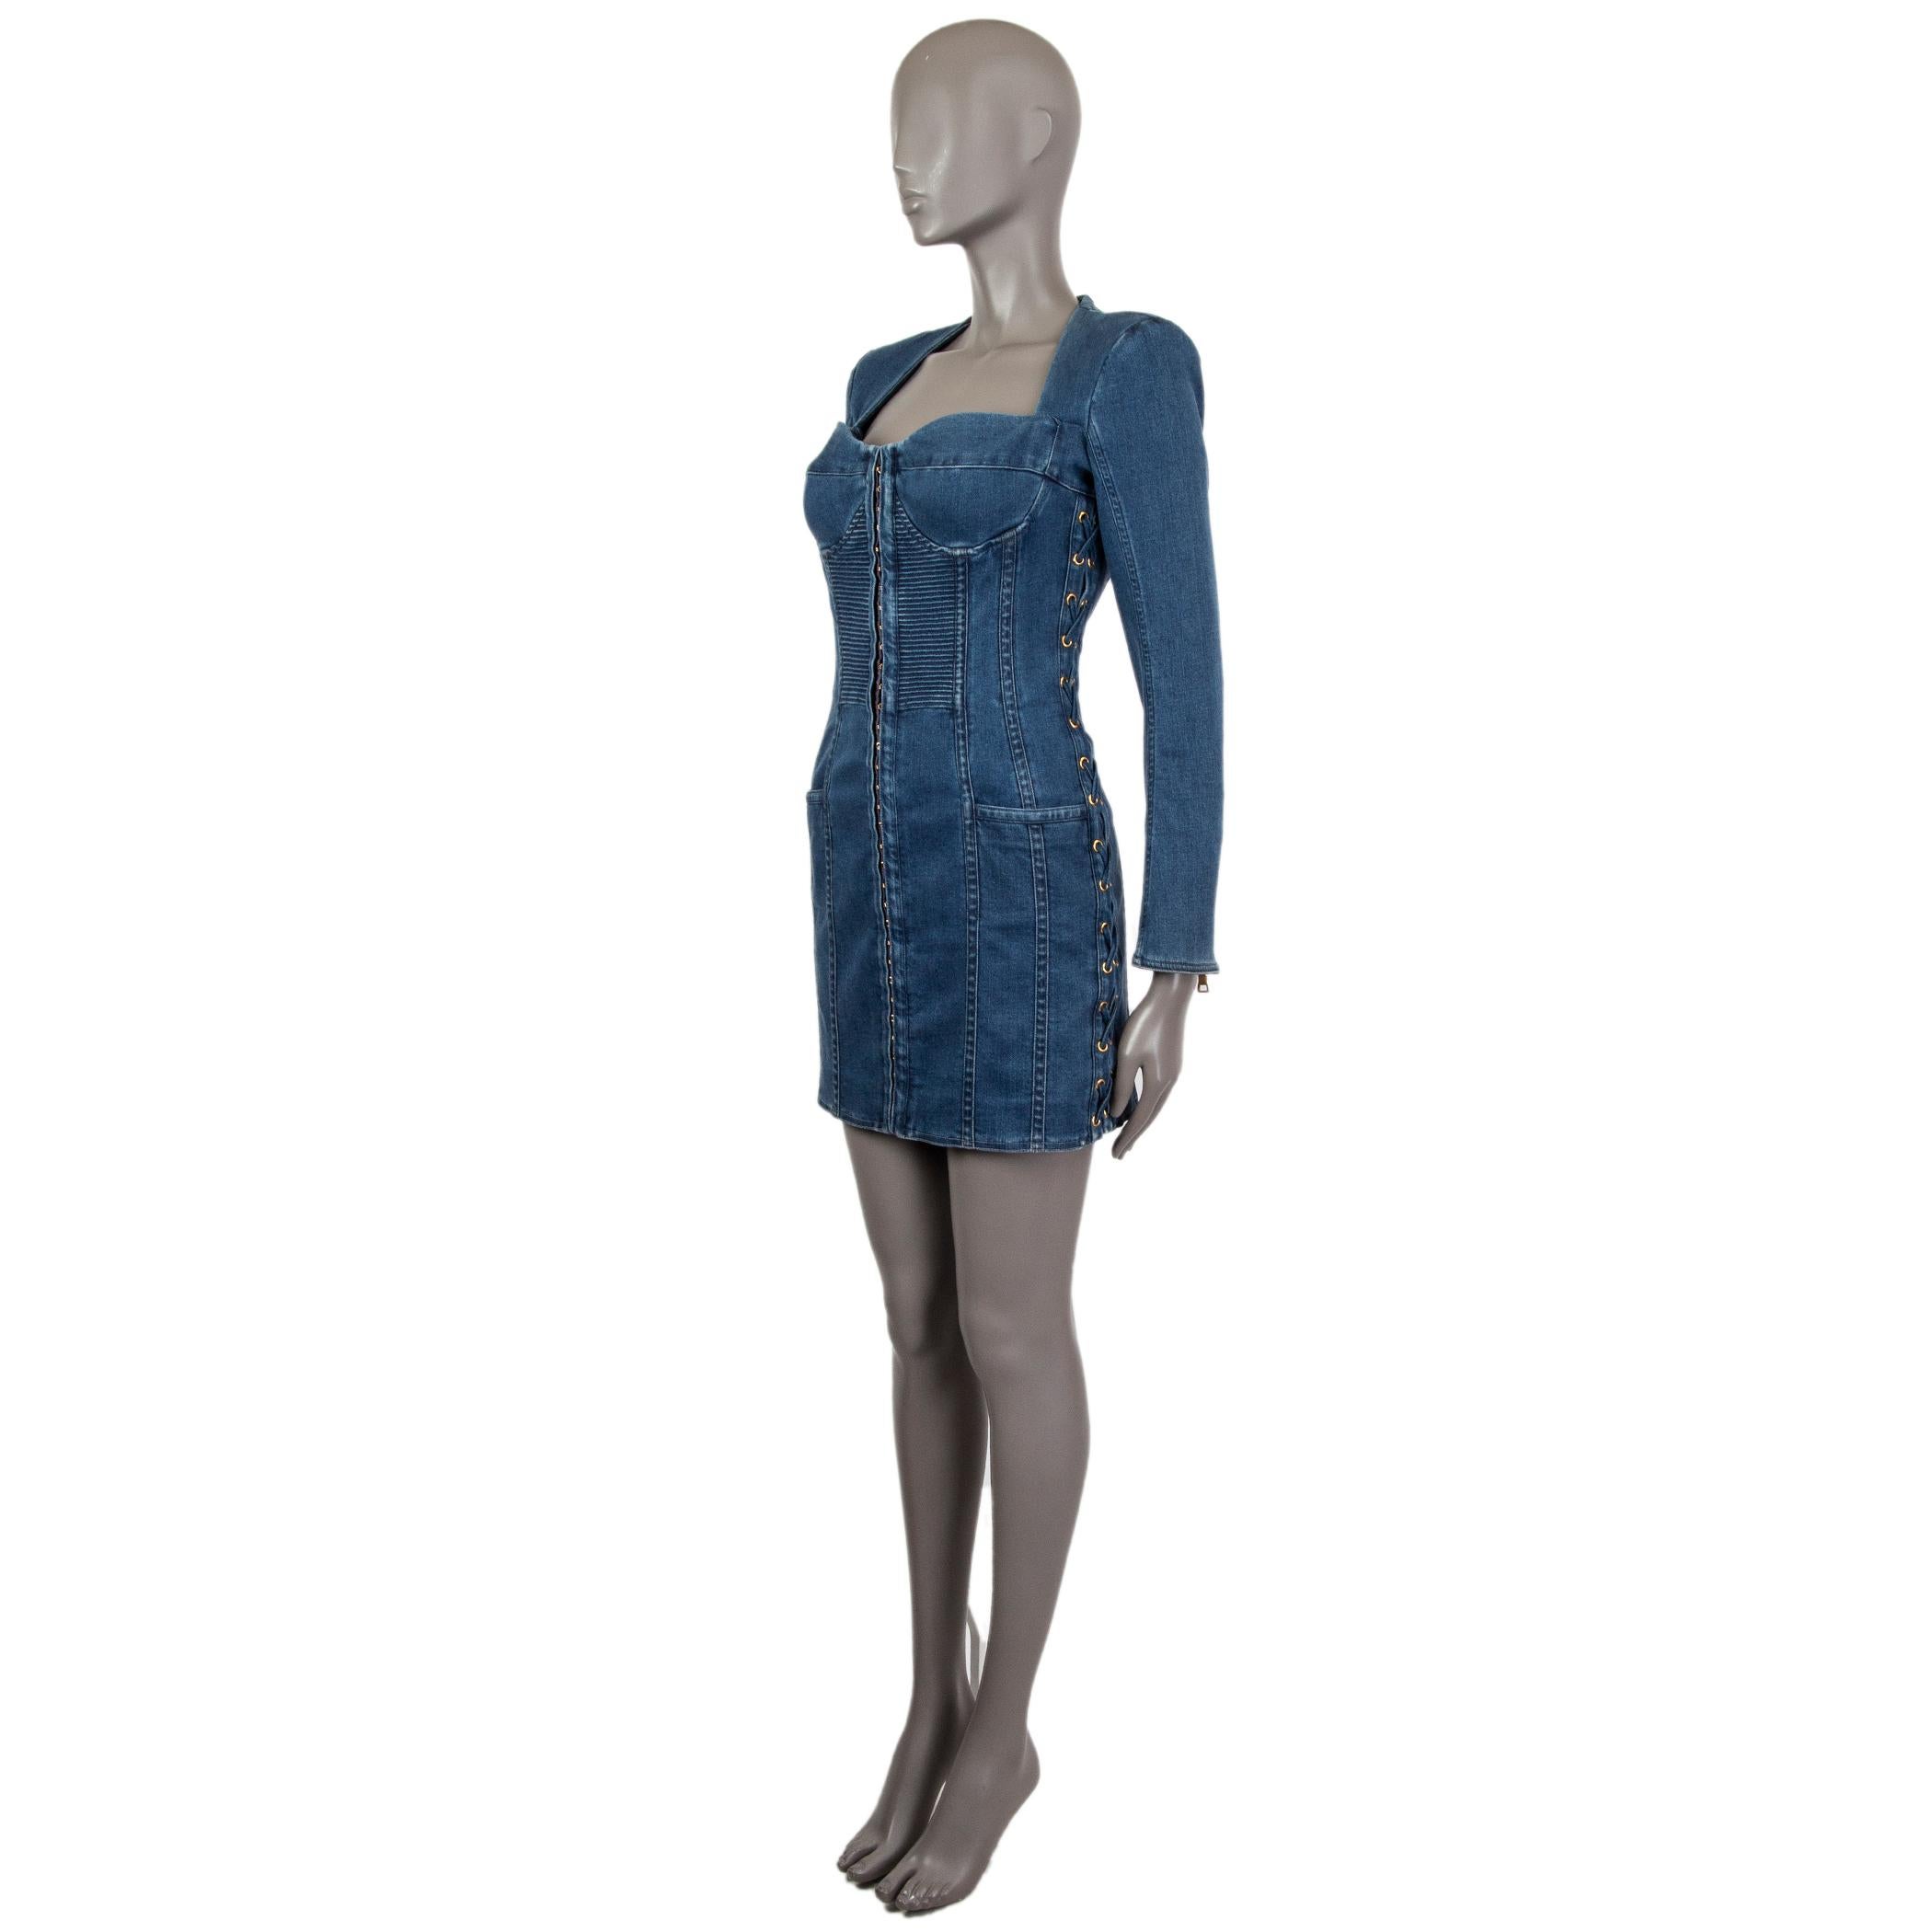 Balmain long-sleeved mini dress in indigo wash cotton (96%) elastane (4%) with zipped cuffs, lace-up panel at the sides and slit pockets at the hips. Featuring a bustier with a front panel hook and eye fastening, seam details, gold-tone hardware.